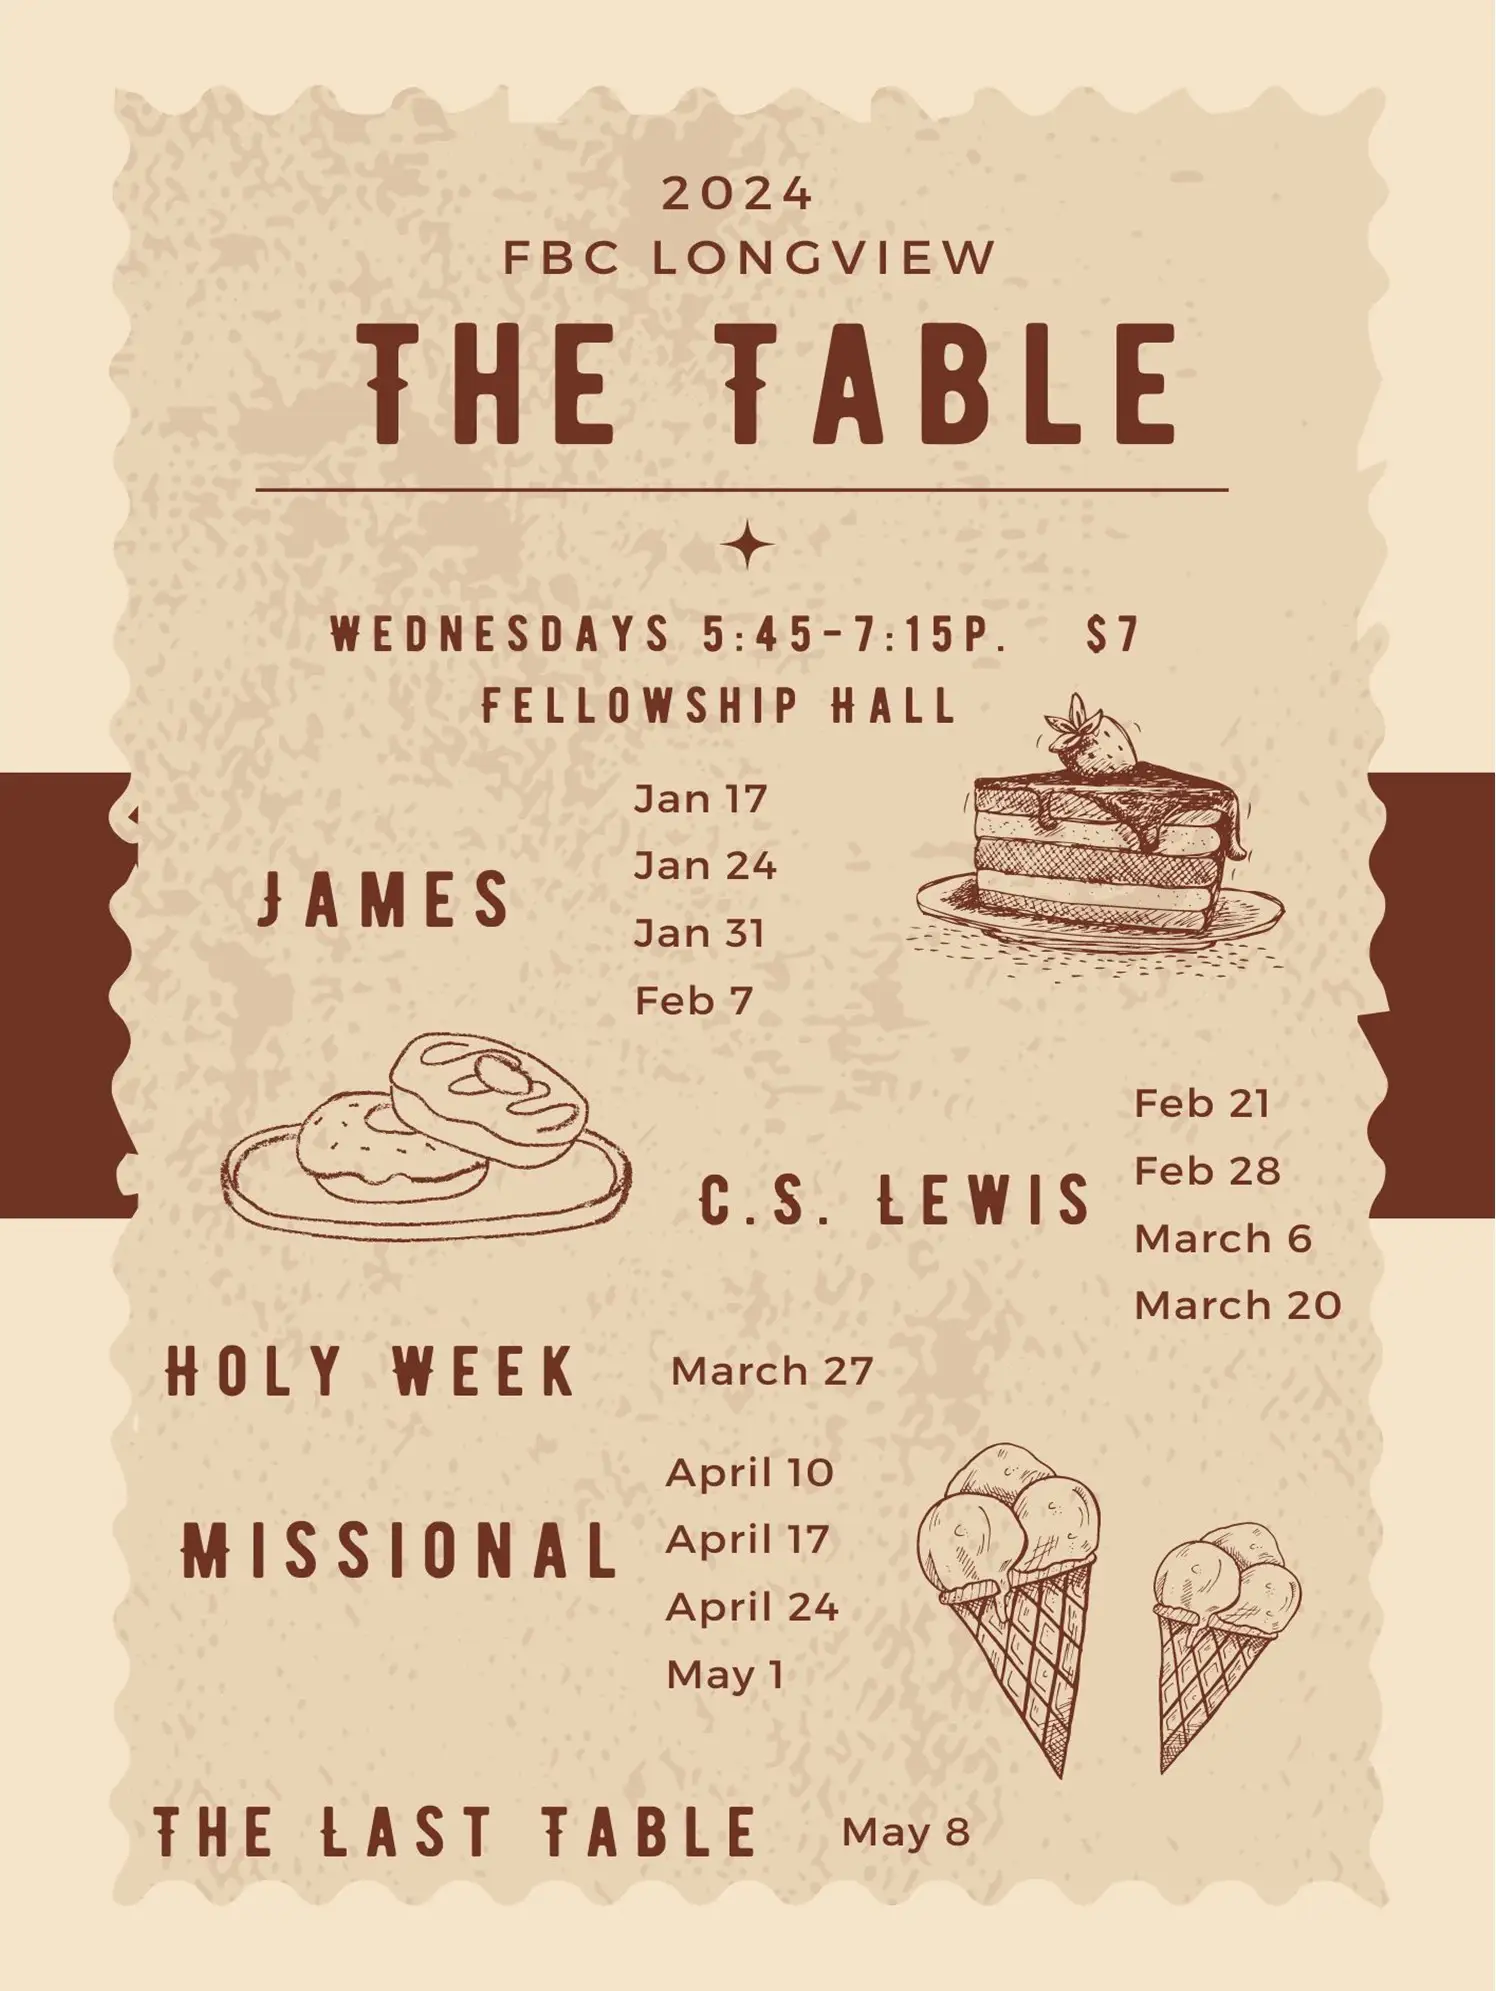 The Table - Wednesday Evening Gatherings for Great Food, New Friendships, and Deep Discipleship.